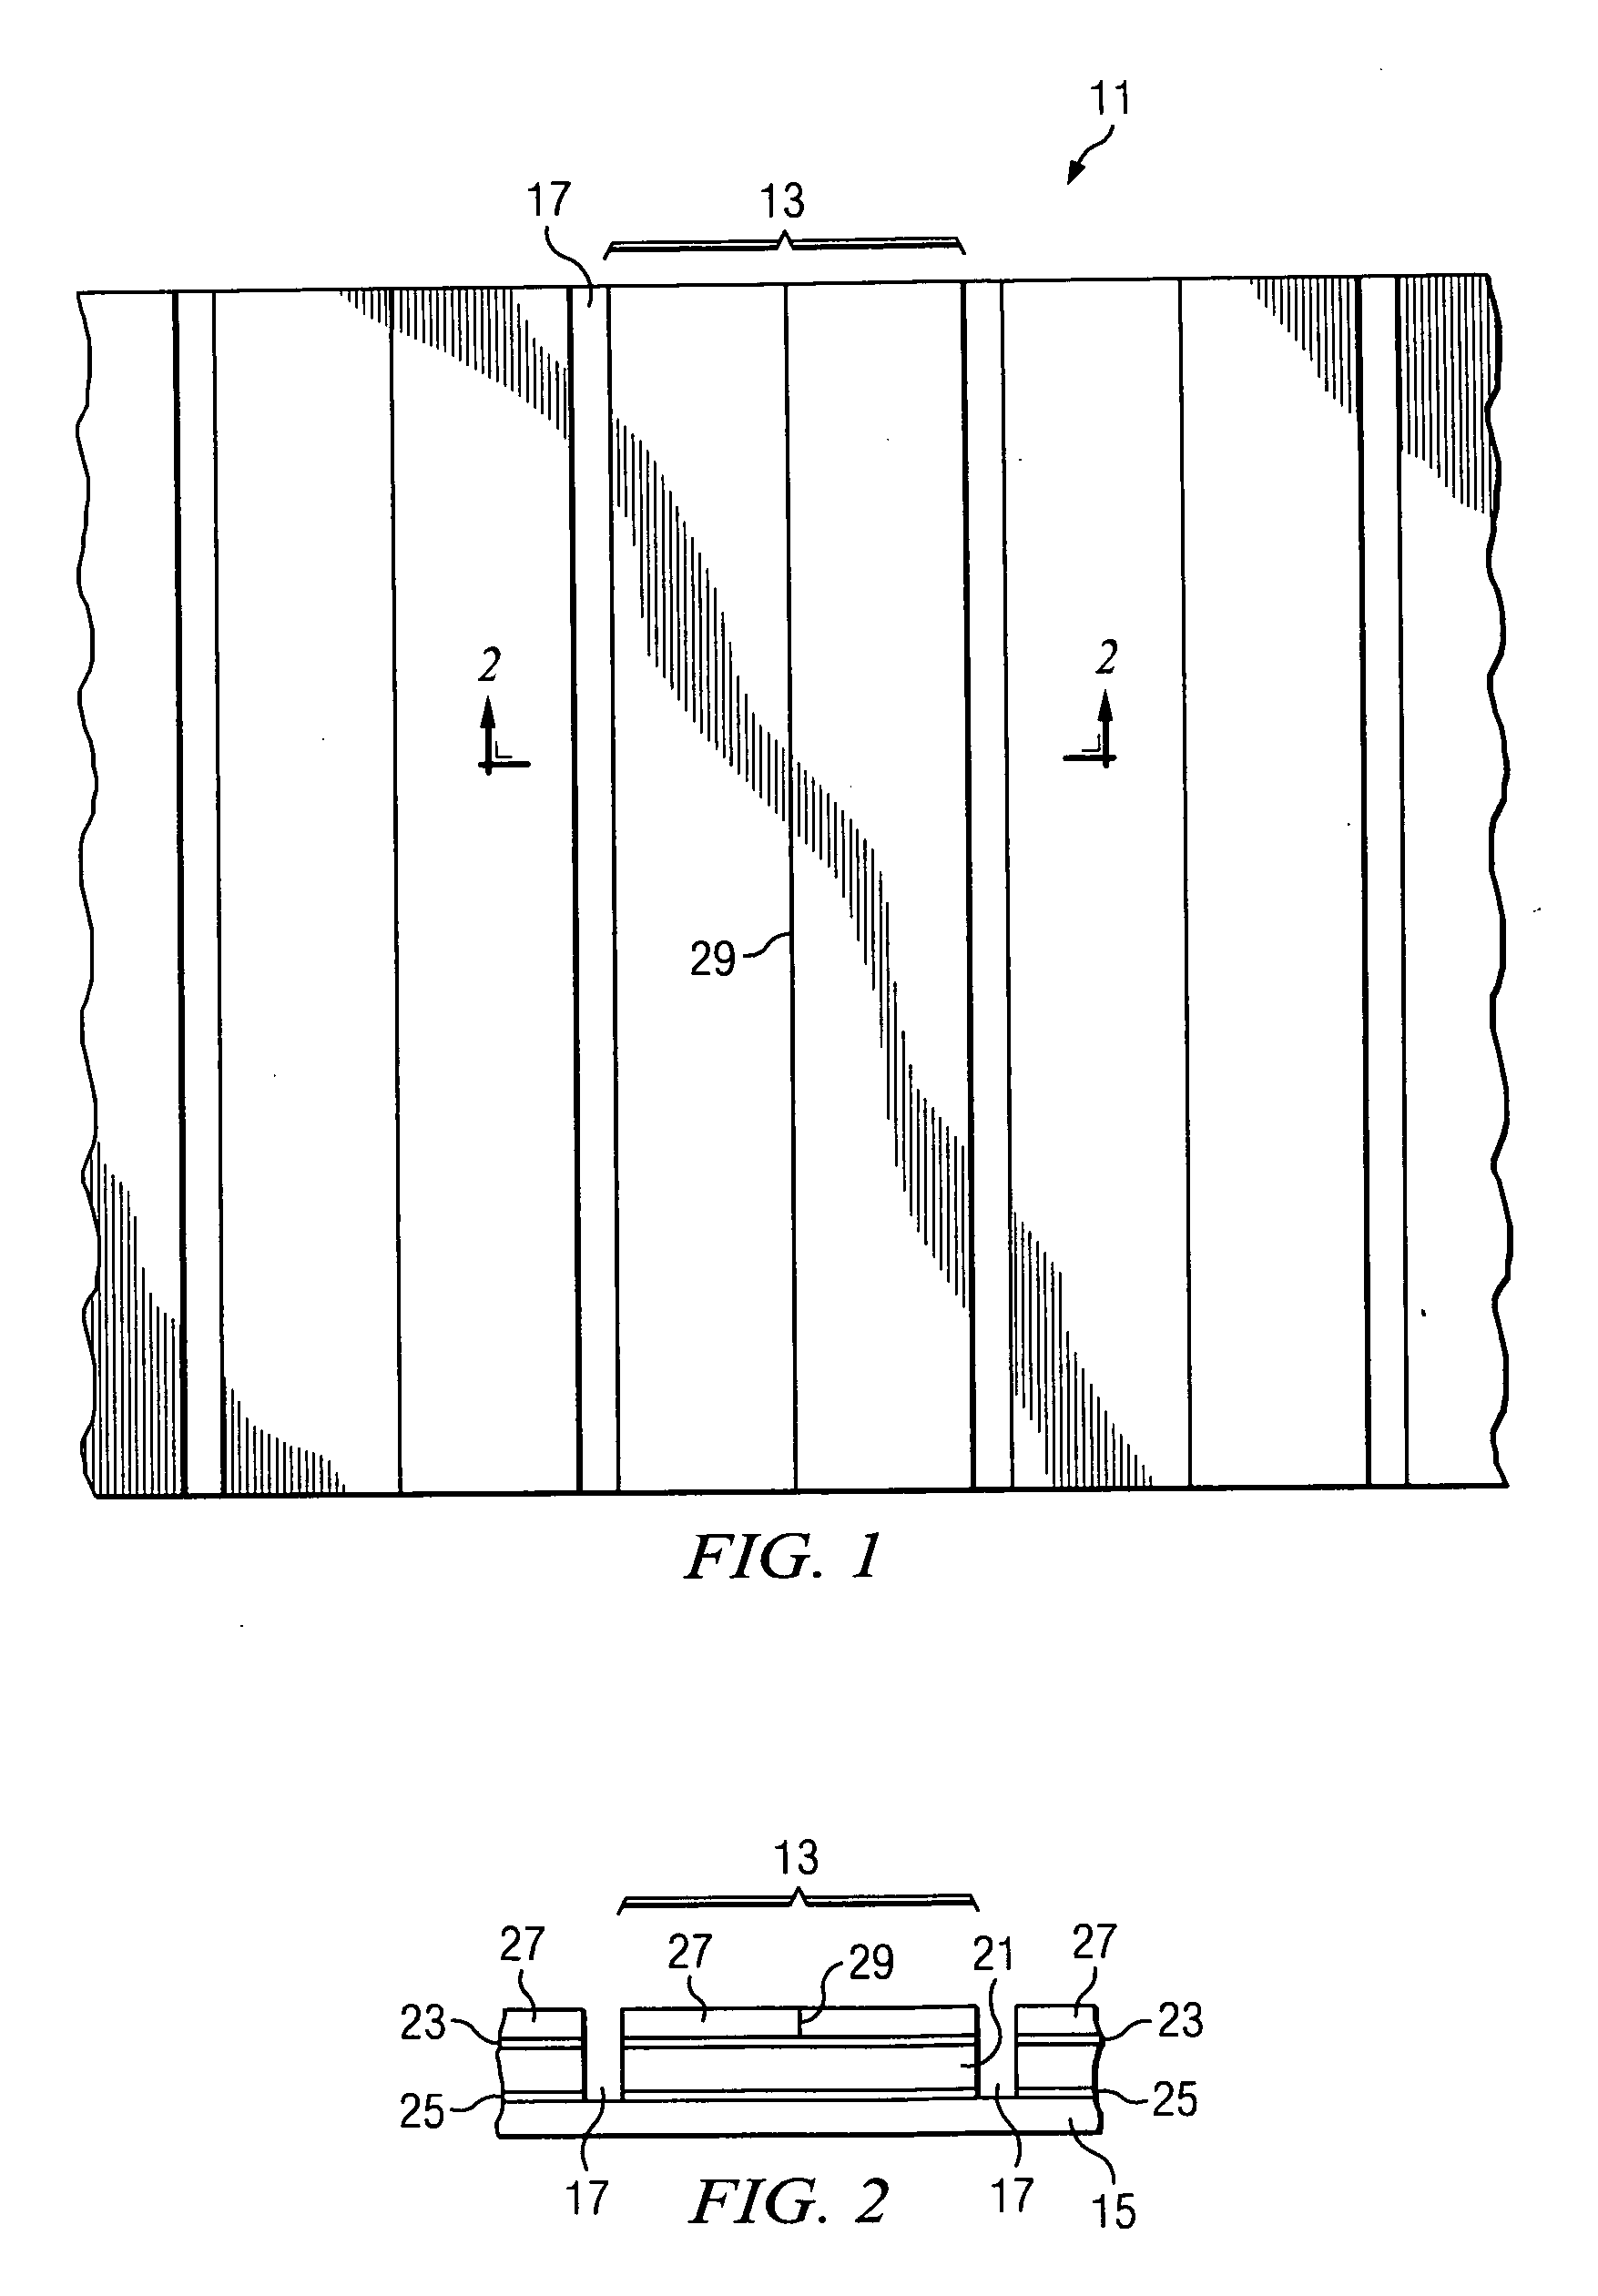 Method and device for preventing pets from clawing home furnishings